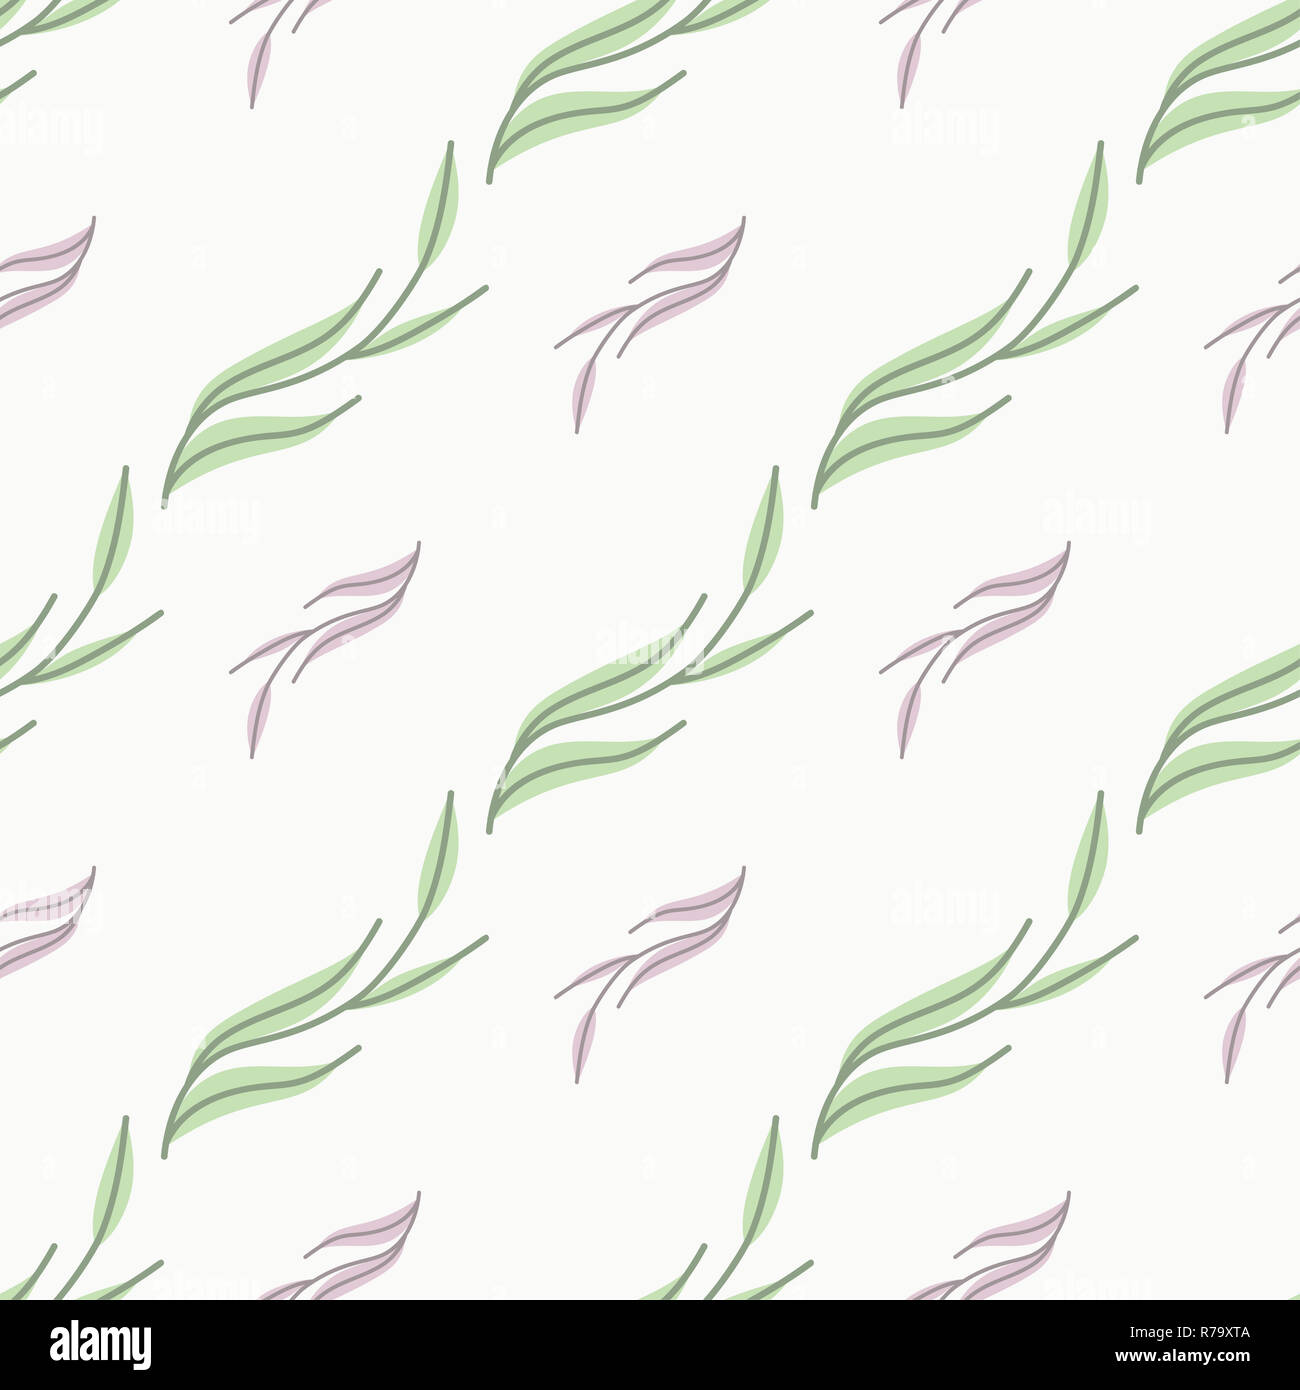 Floral seamless pattern. Hand drawn creative plant. Colorful artistic background. Abstract herb. It can be used for cover, card, fabric, wrapping, wallpaper, other interior decor Stock Photo